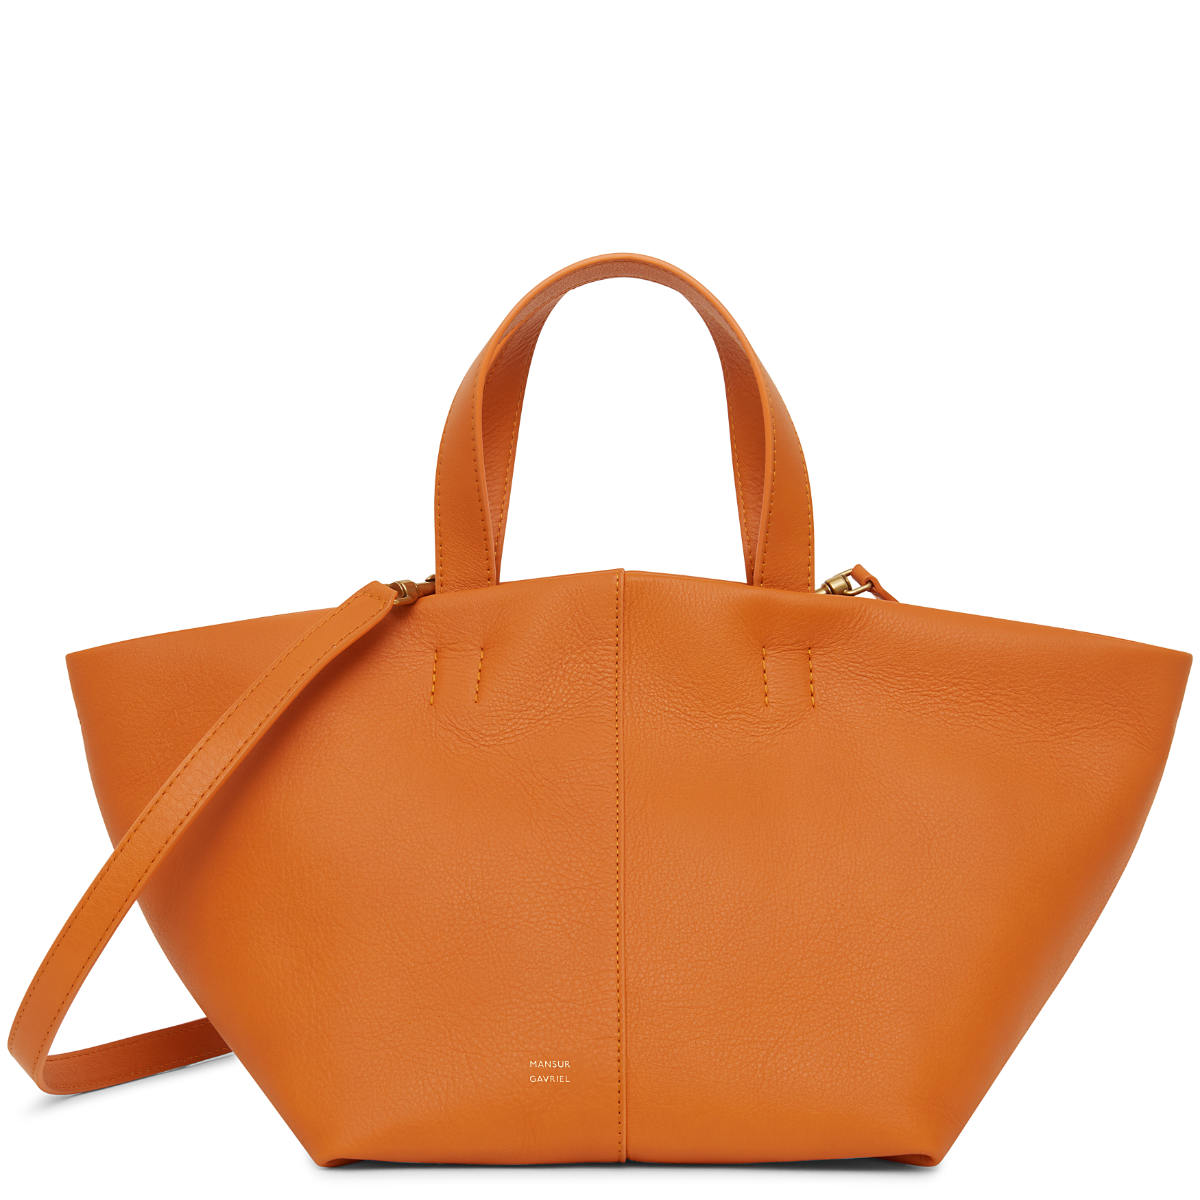 Mansur Gavriel And Its Spring Summer 2021 Collection